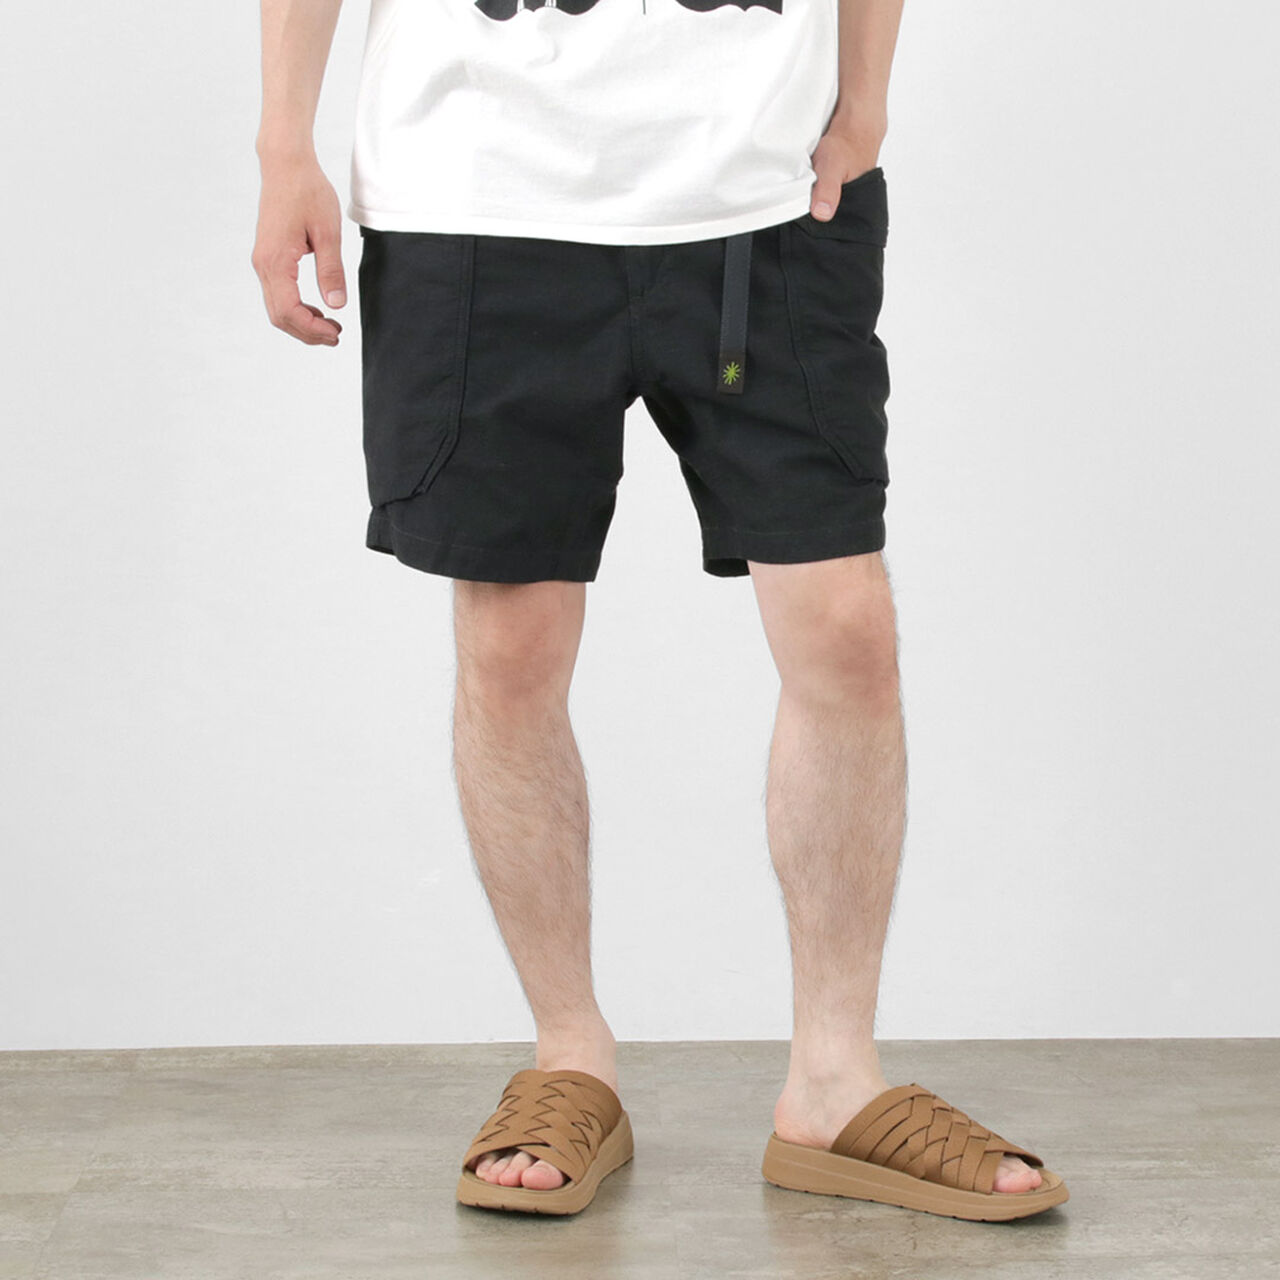 Ultimate Shorts Hemp Cotton Recycled Polyester Weather Cloth,BlackIris, large image number 0